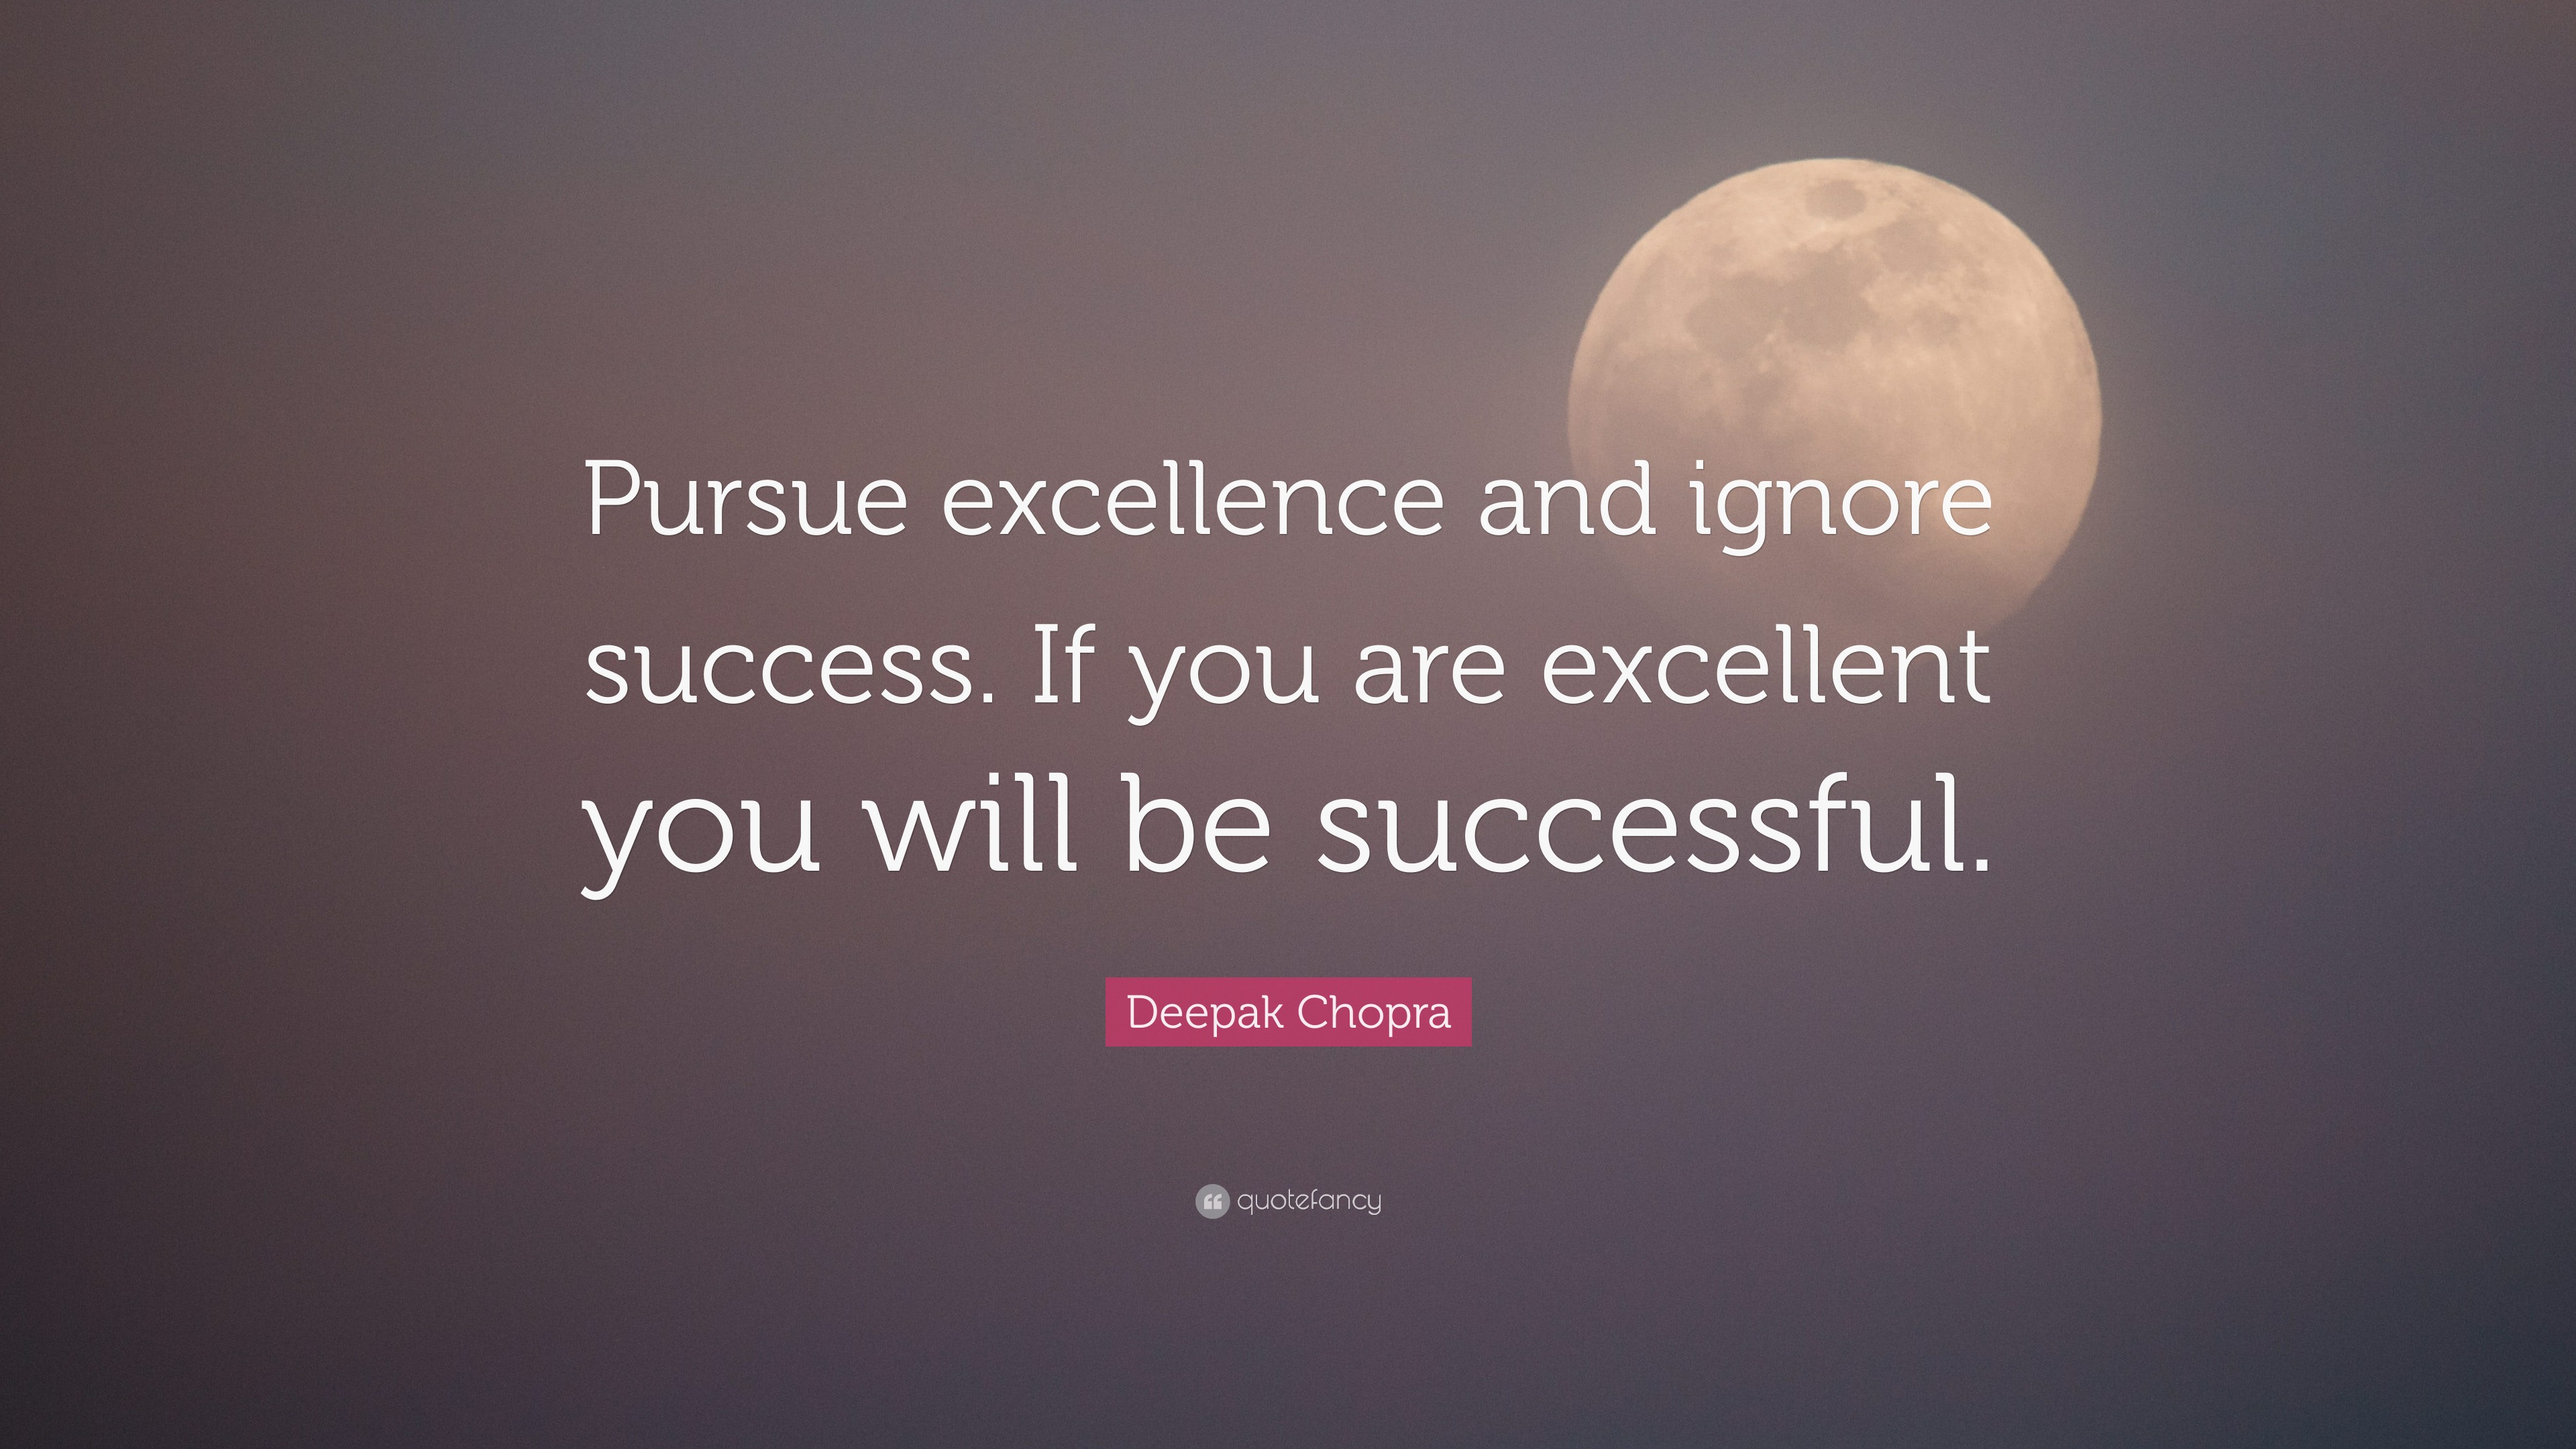 Deepak Chopra Quote Pursue Excellence And Ignore Success If You Are Excellent You Will Be